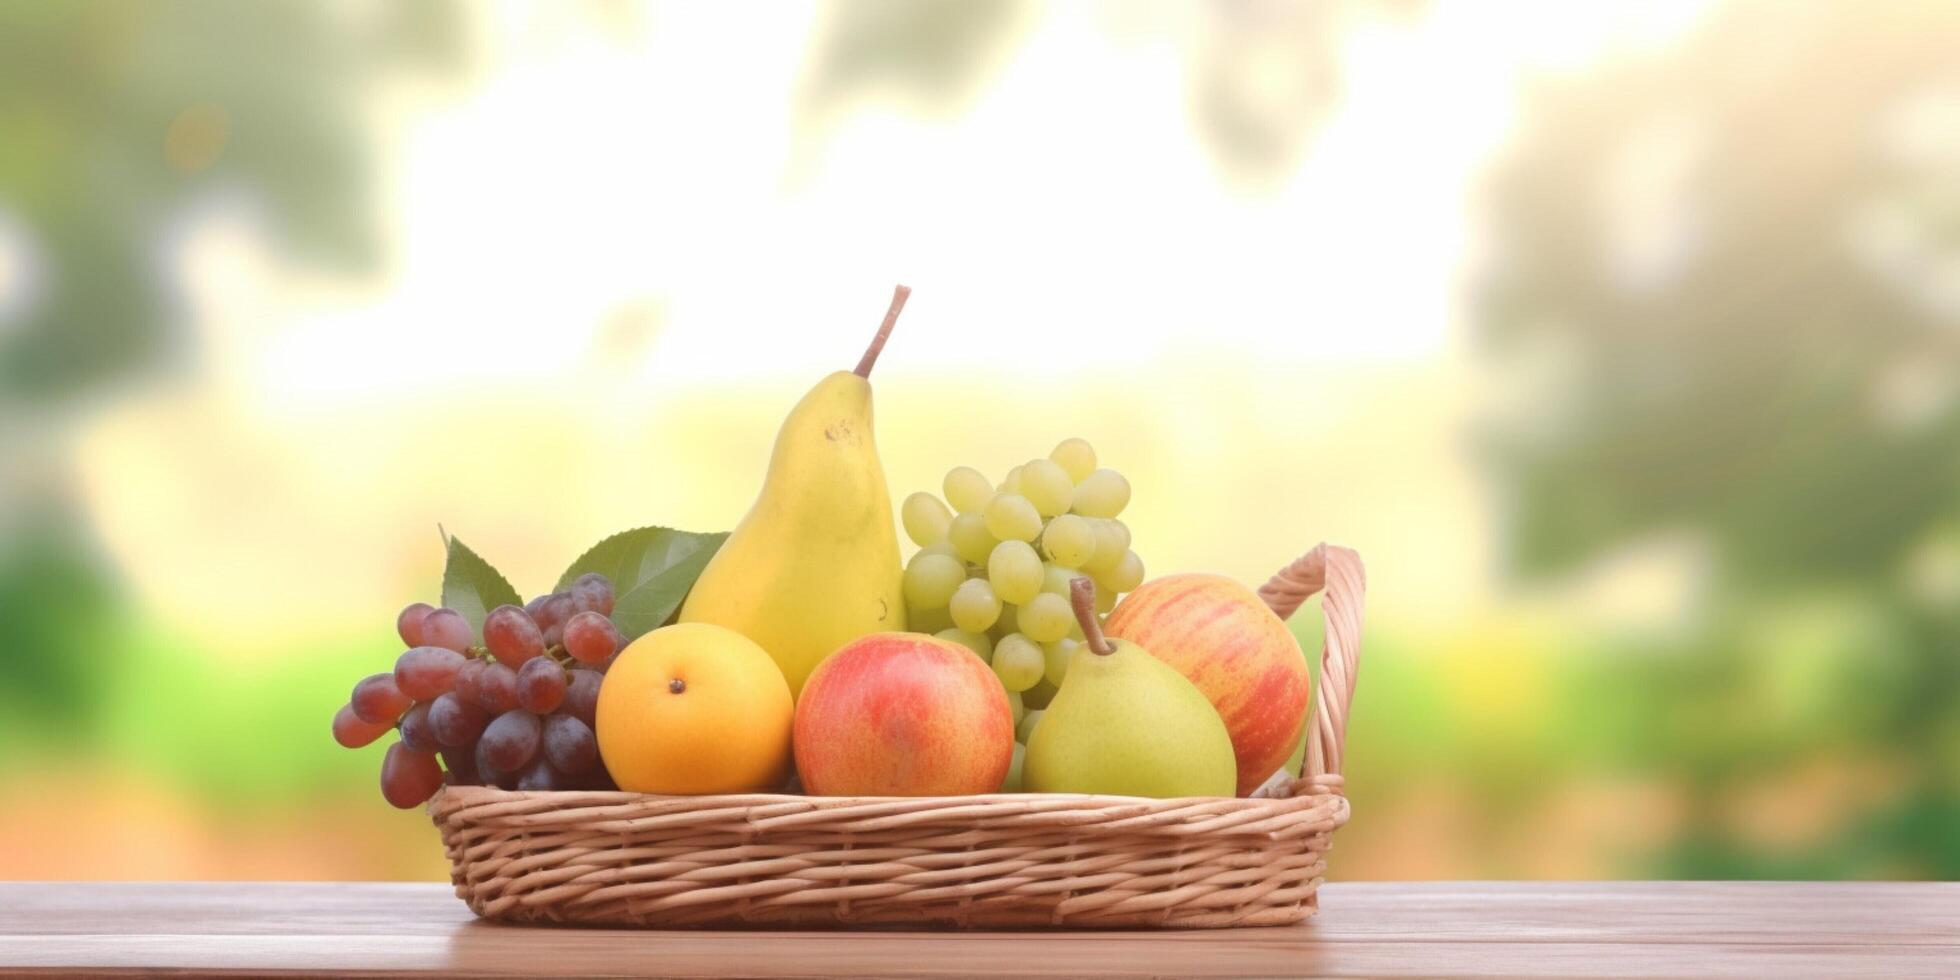 Fruits basket on a wooden table with blur jungle background photo